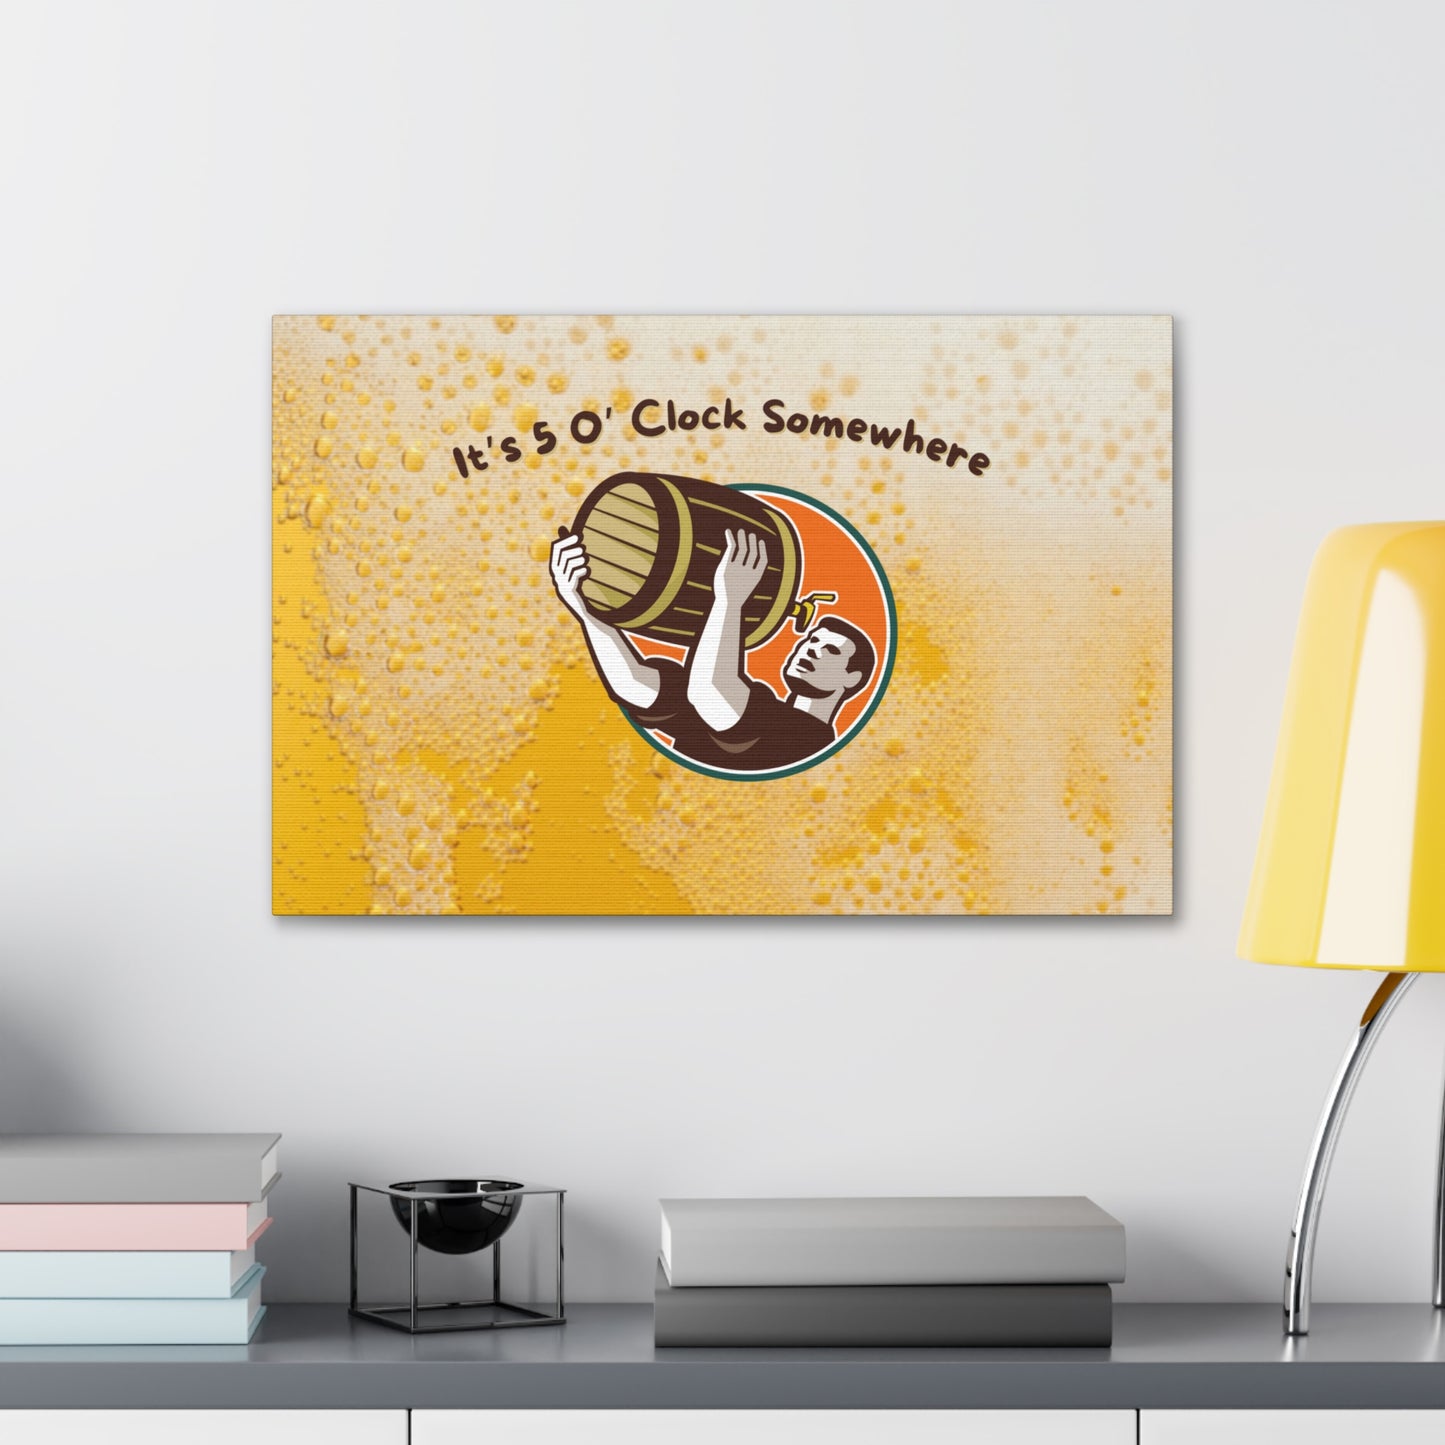 "It's 5 O' Clock Somewhere" Wall Art - Weave Got Gifts - Unique Gifts You Won’t Find Anywhere Else!